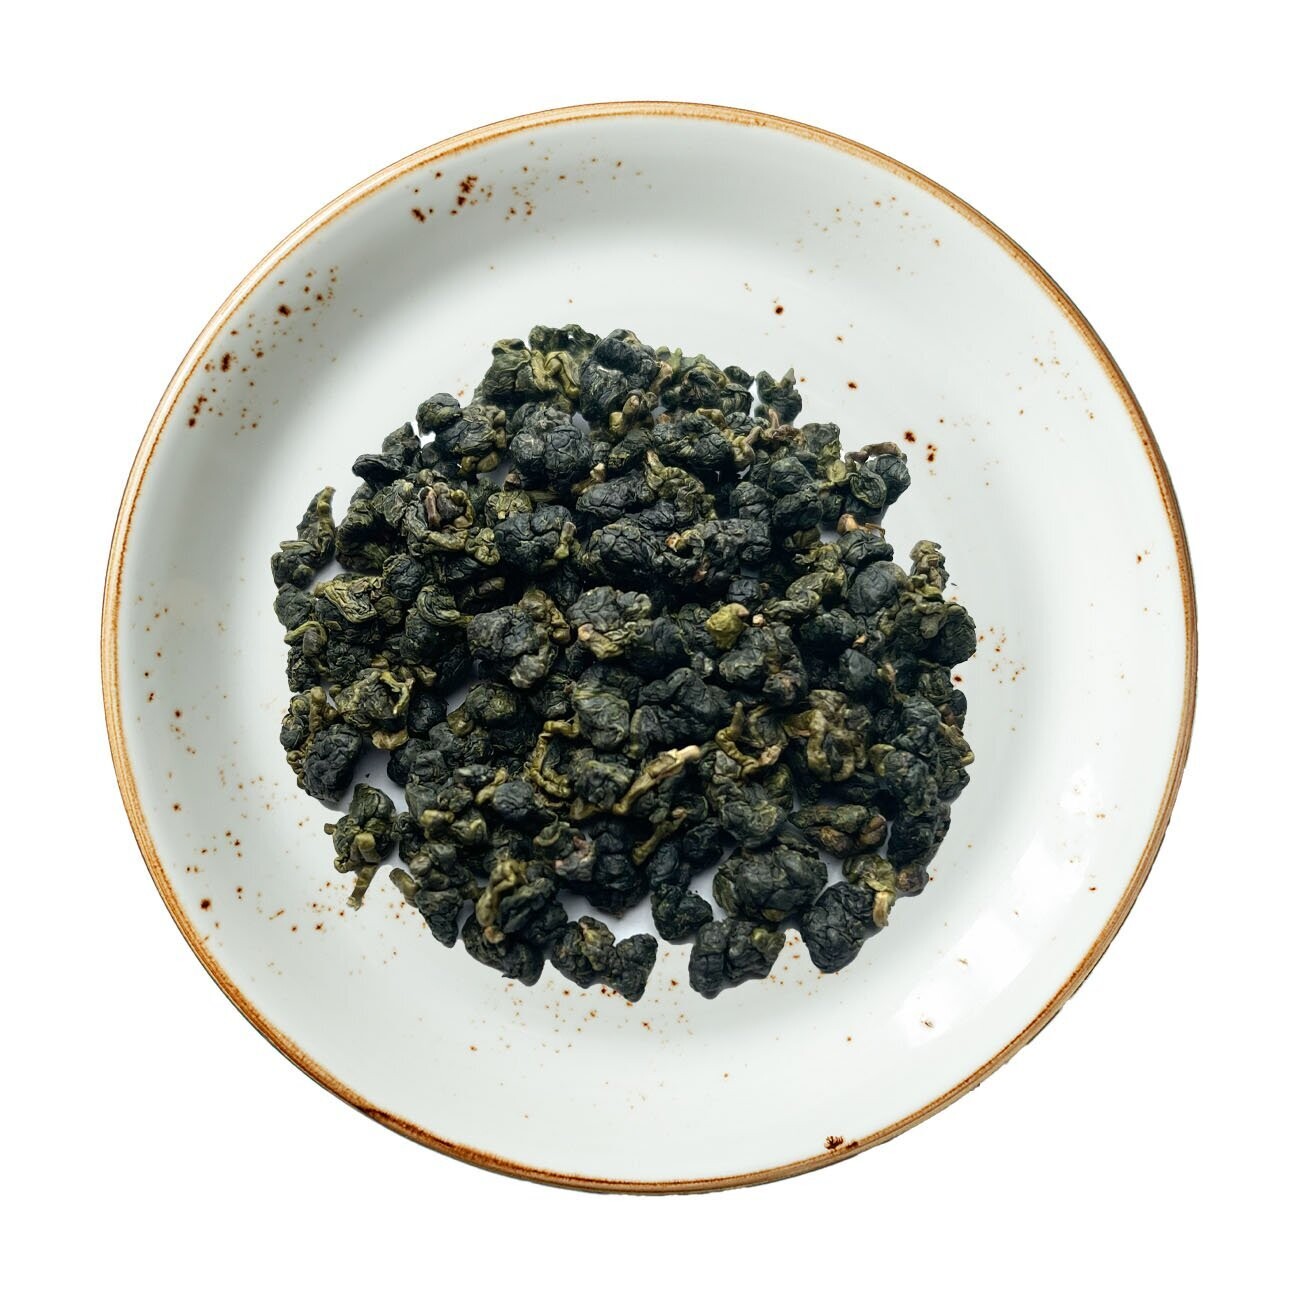 Shan Ling Xi Forest Oolong Tea, Size: One Ounce (28 grams)